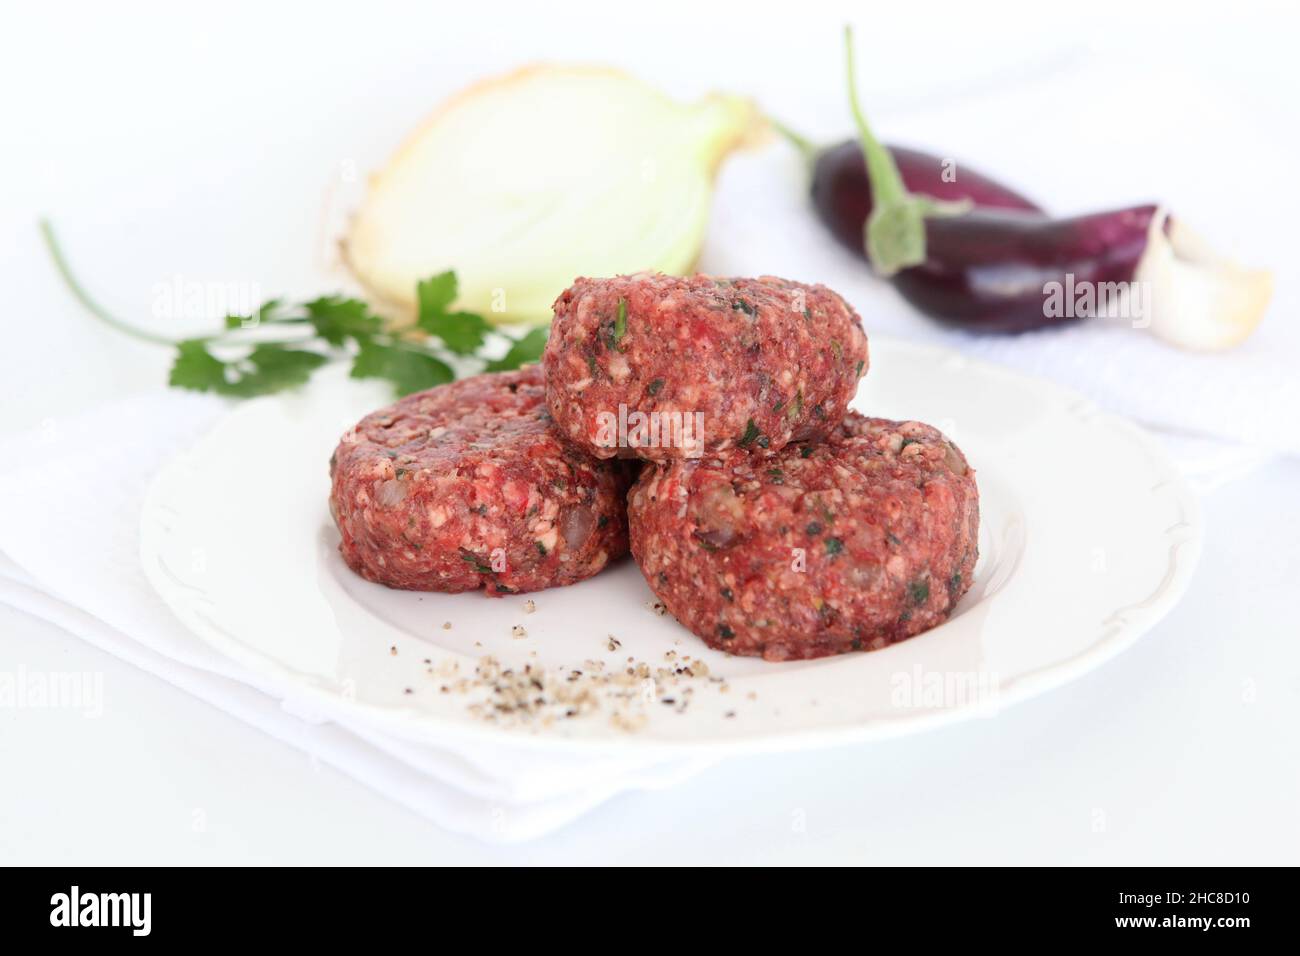 a stack of Raw spiced Kebab on wooden platter Stock Photo